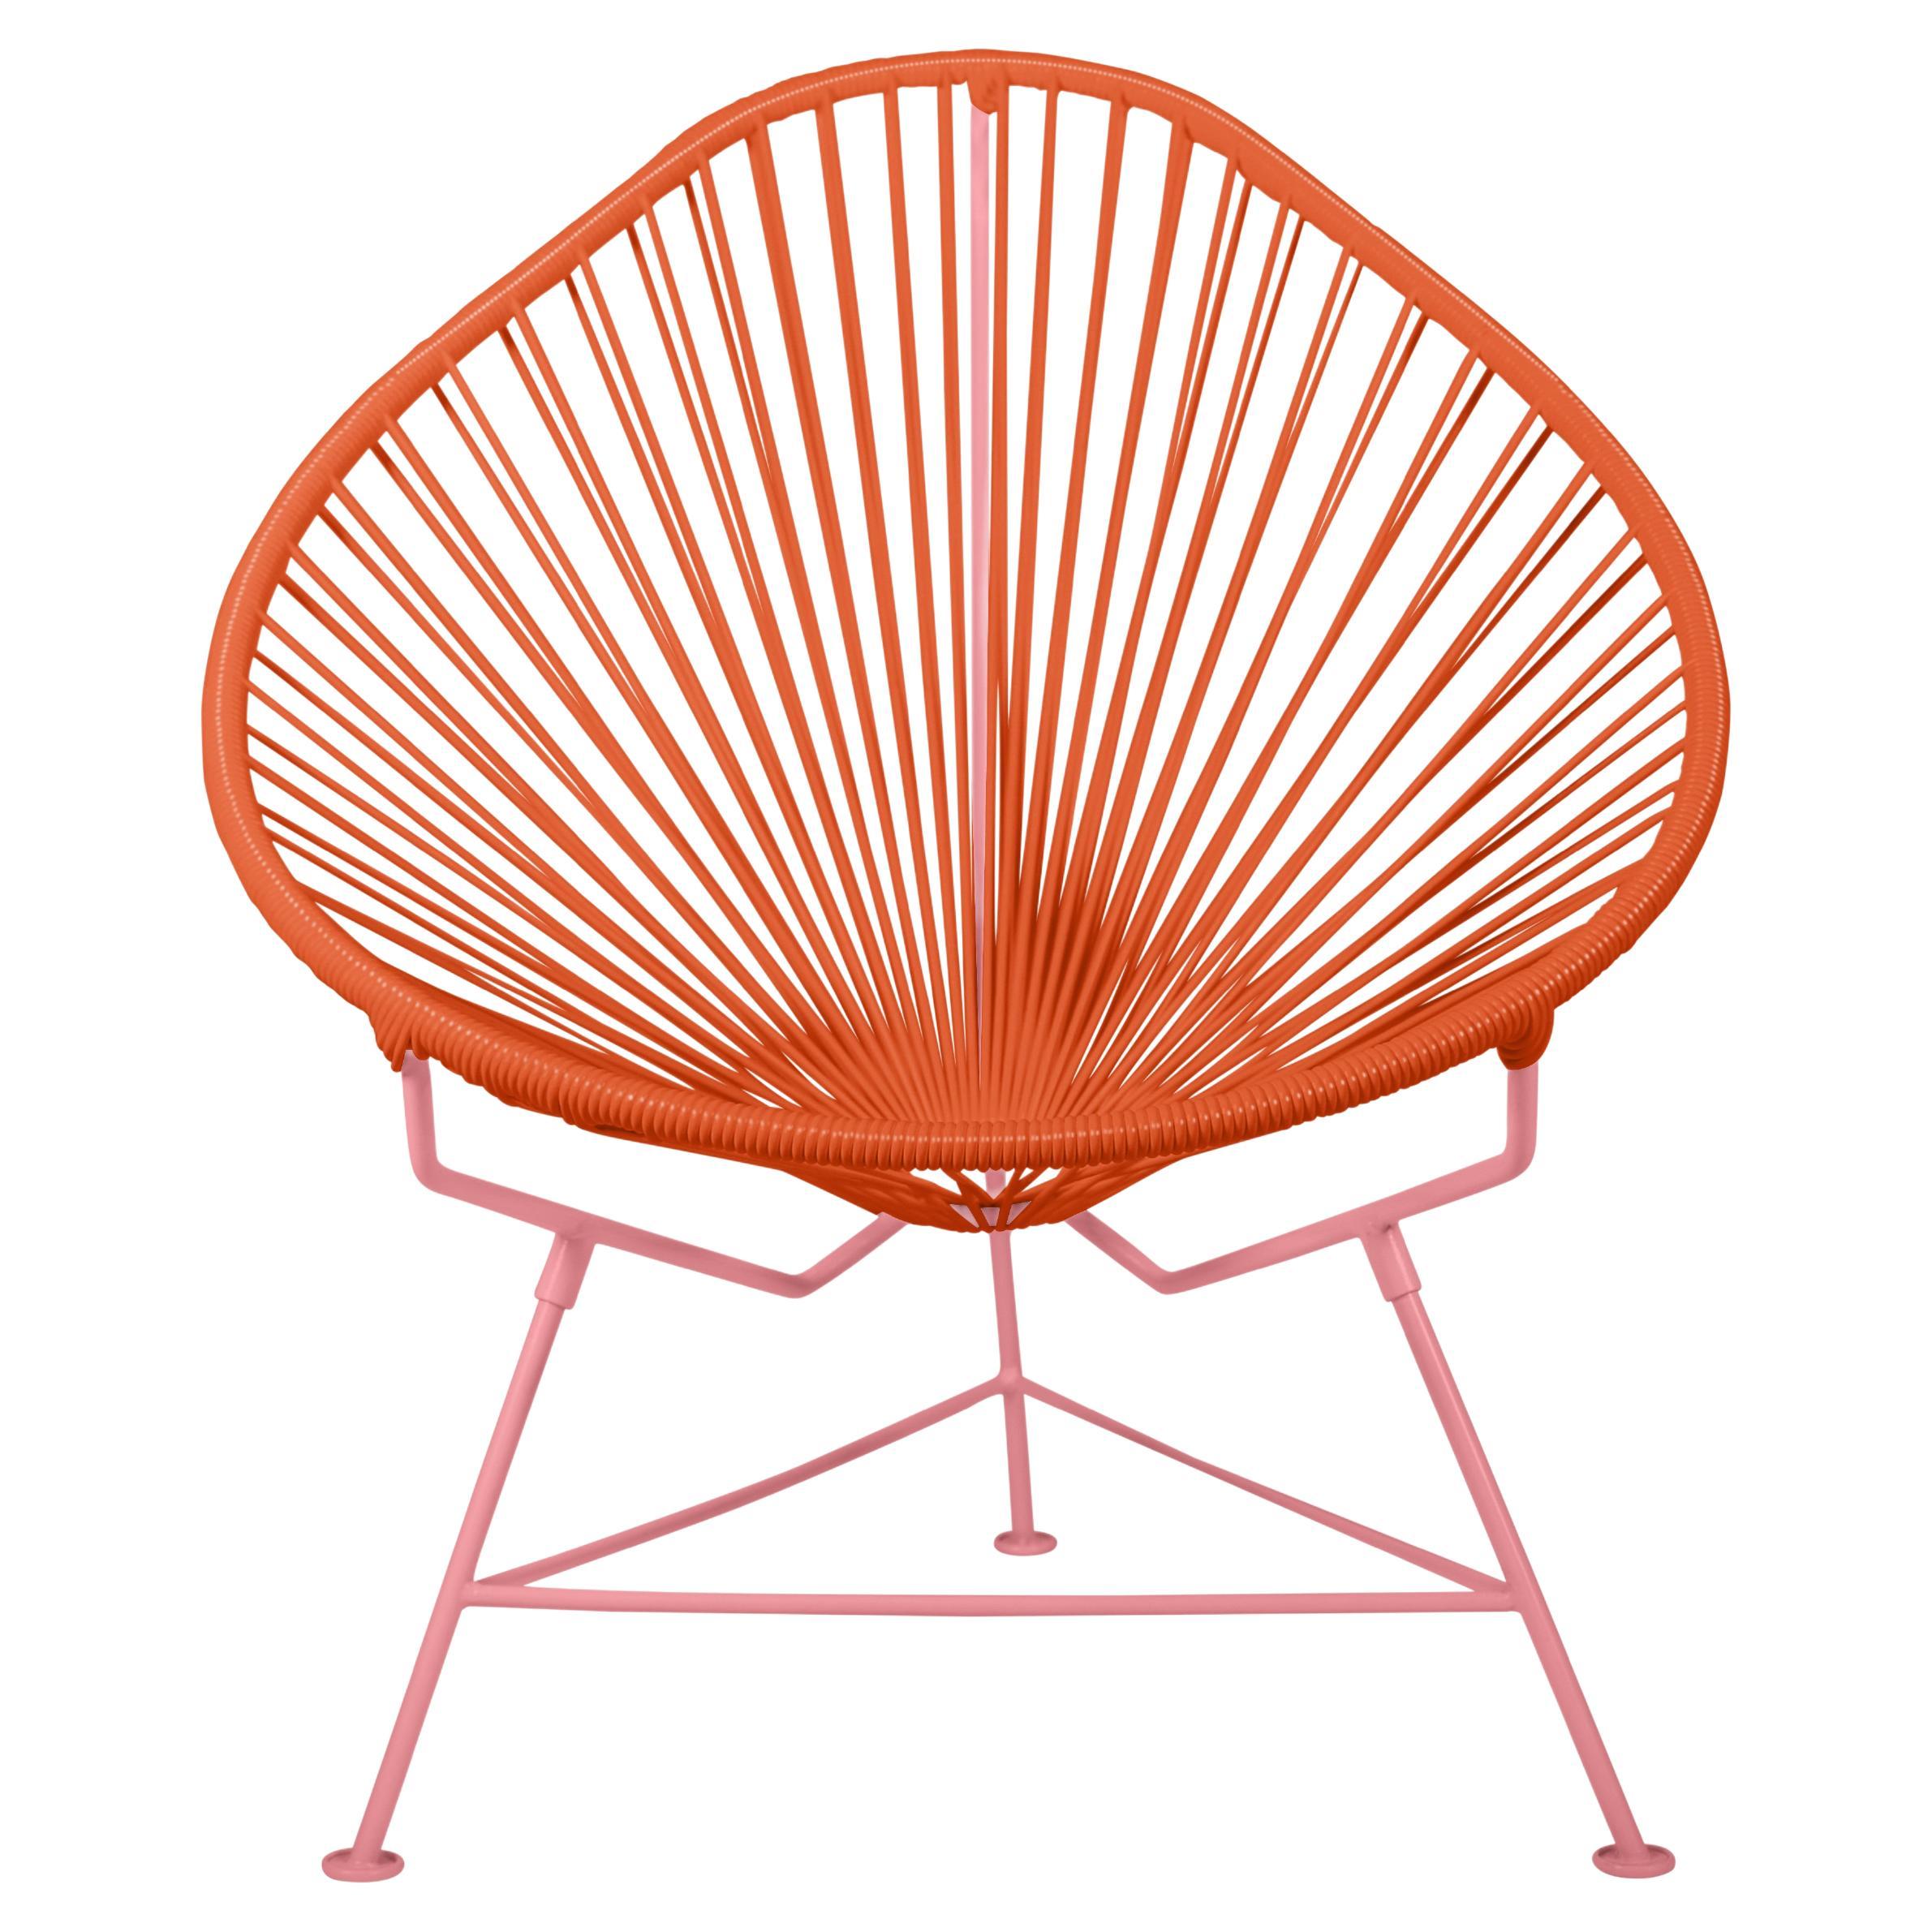 Innit Designs Acapulco Chair Orange Weave on Coral Frame For Sale